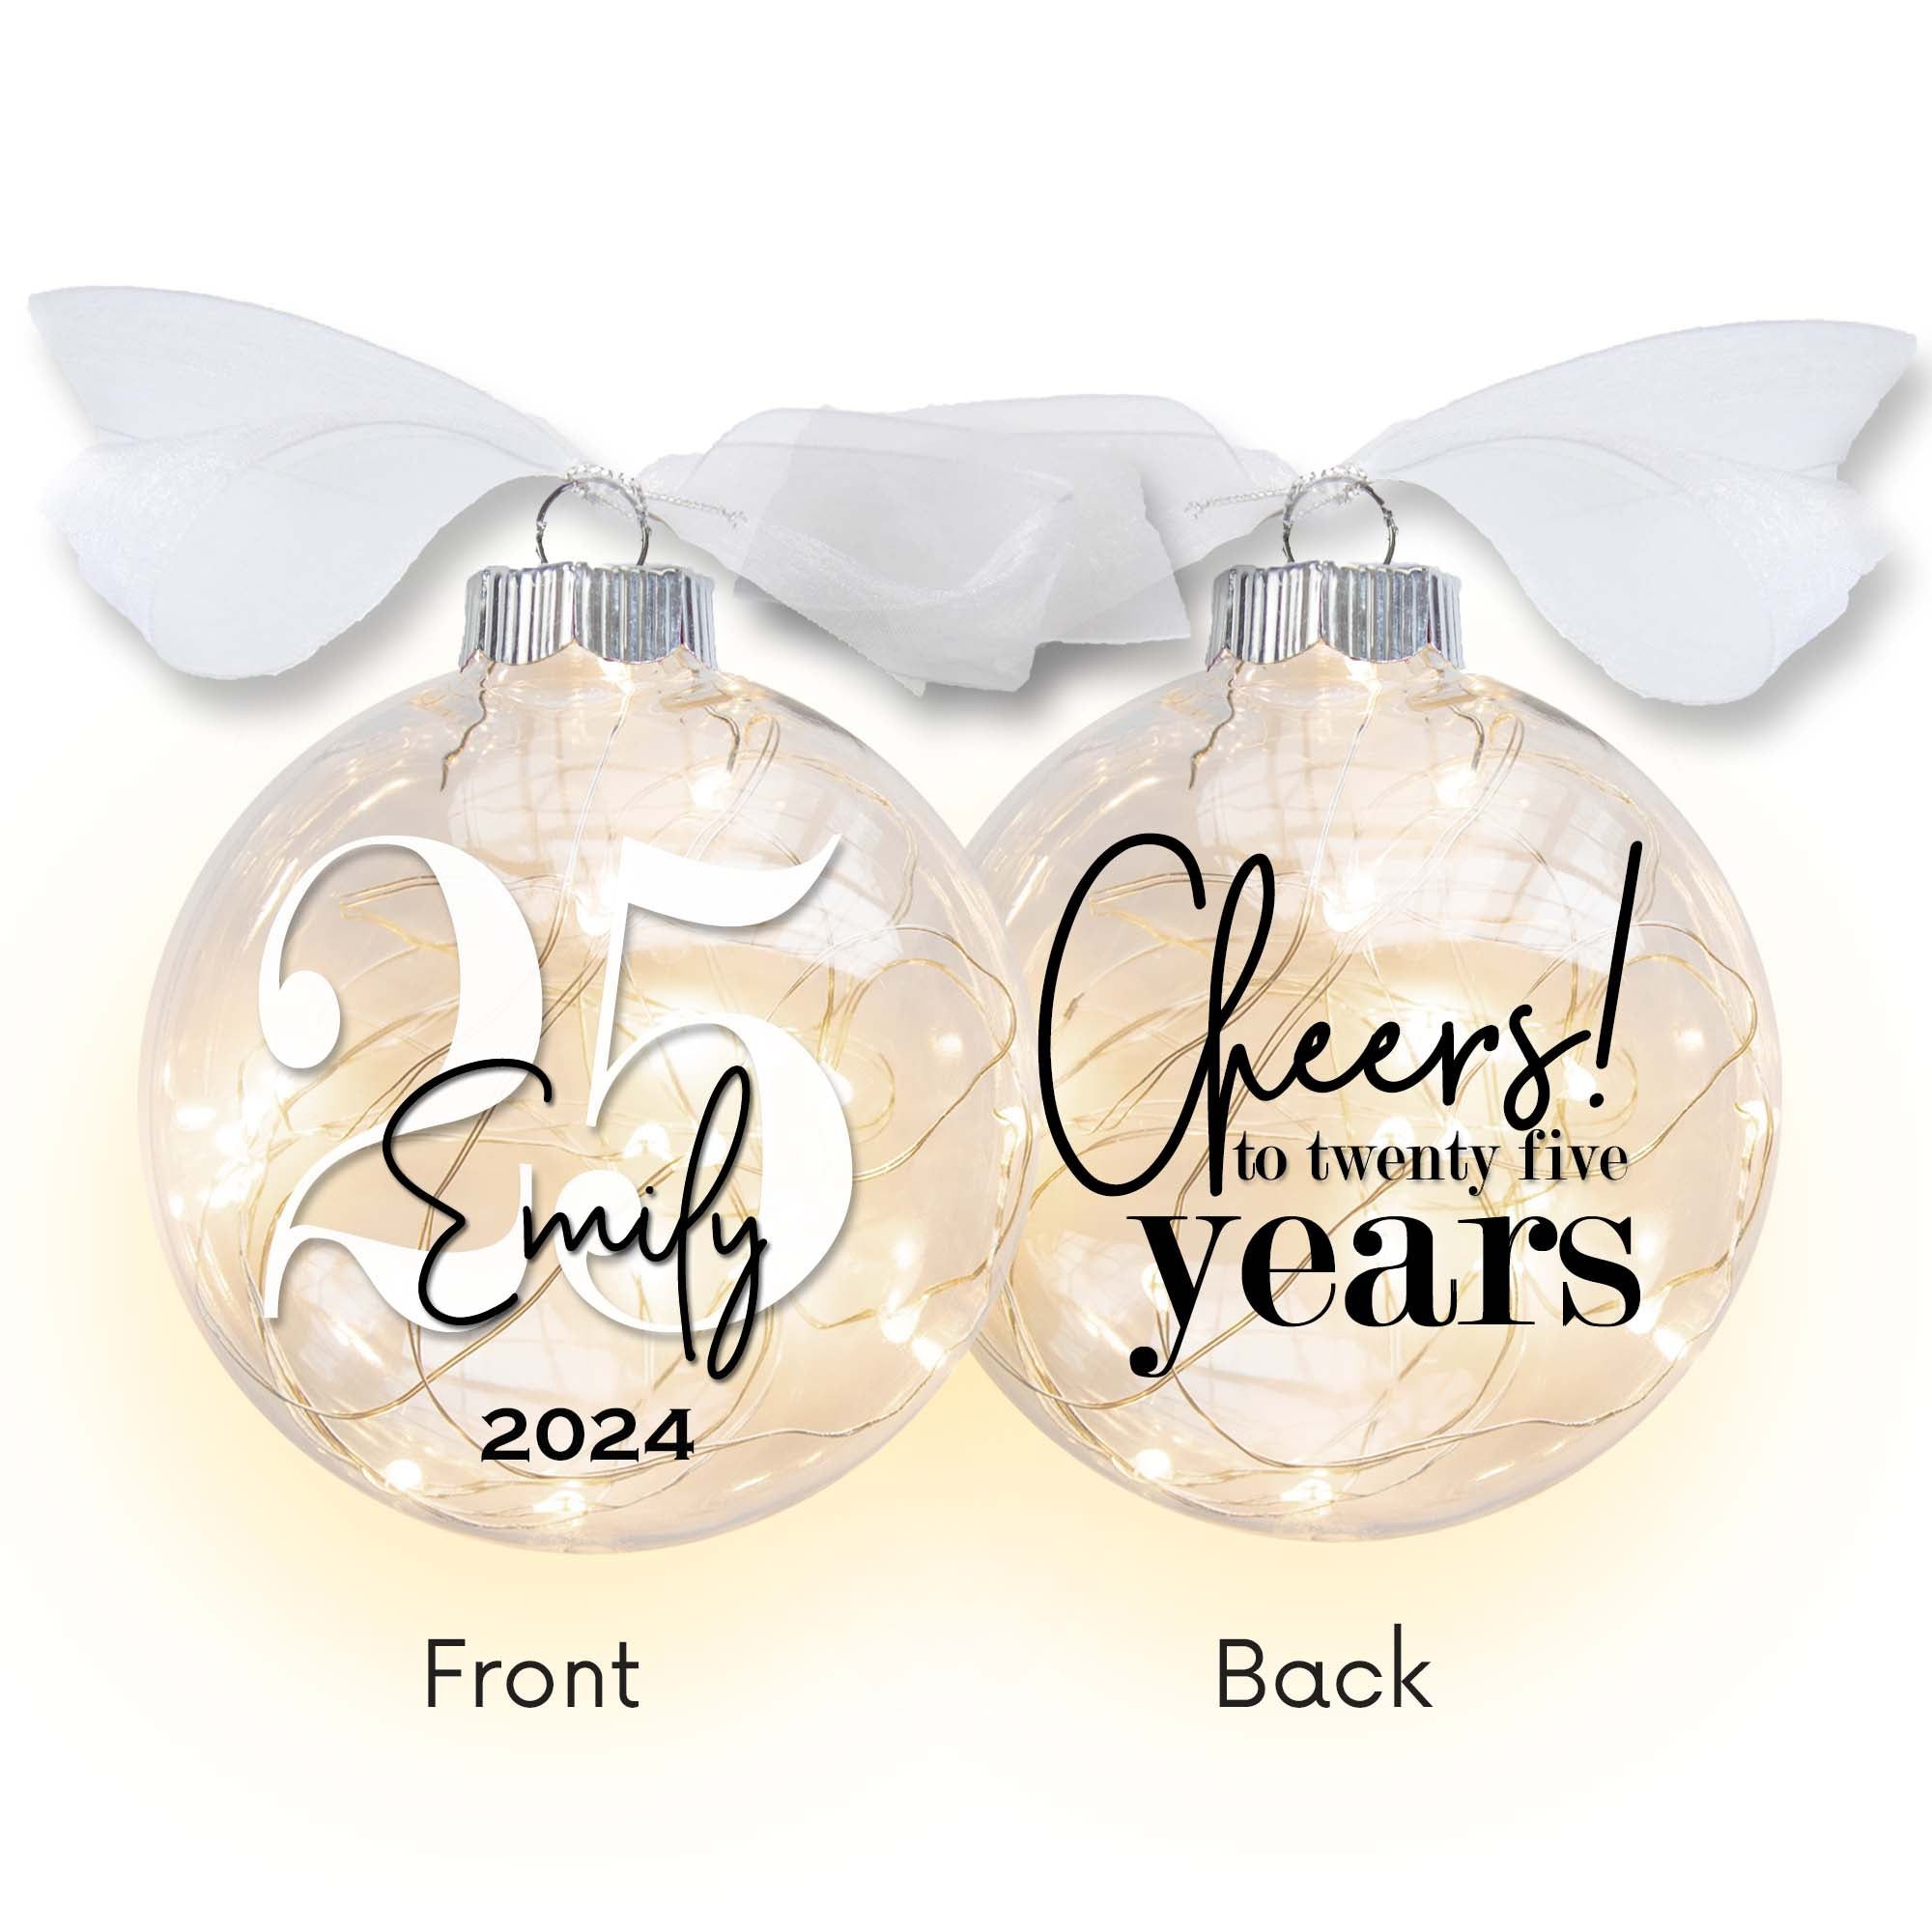 Personalized 25th Birthday Lighted Christmas Ornament - Cheers to 25